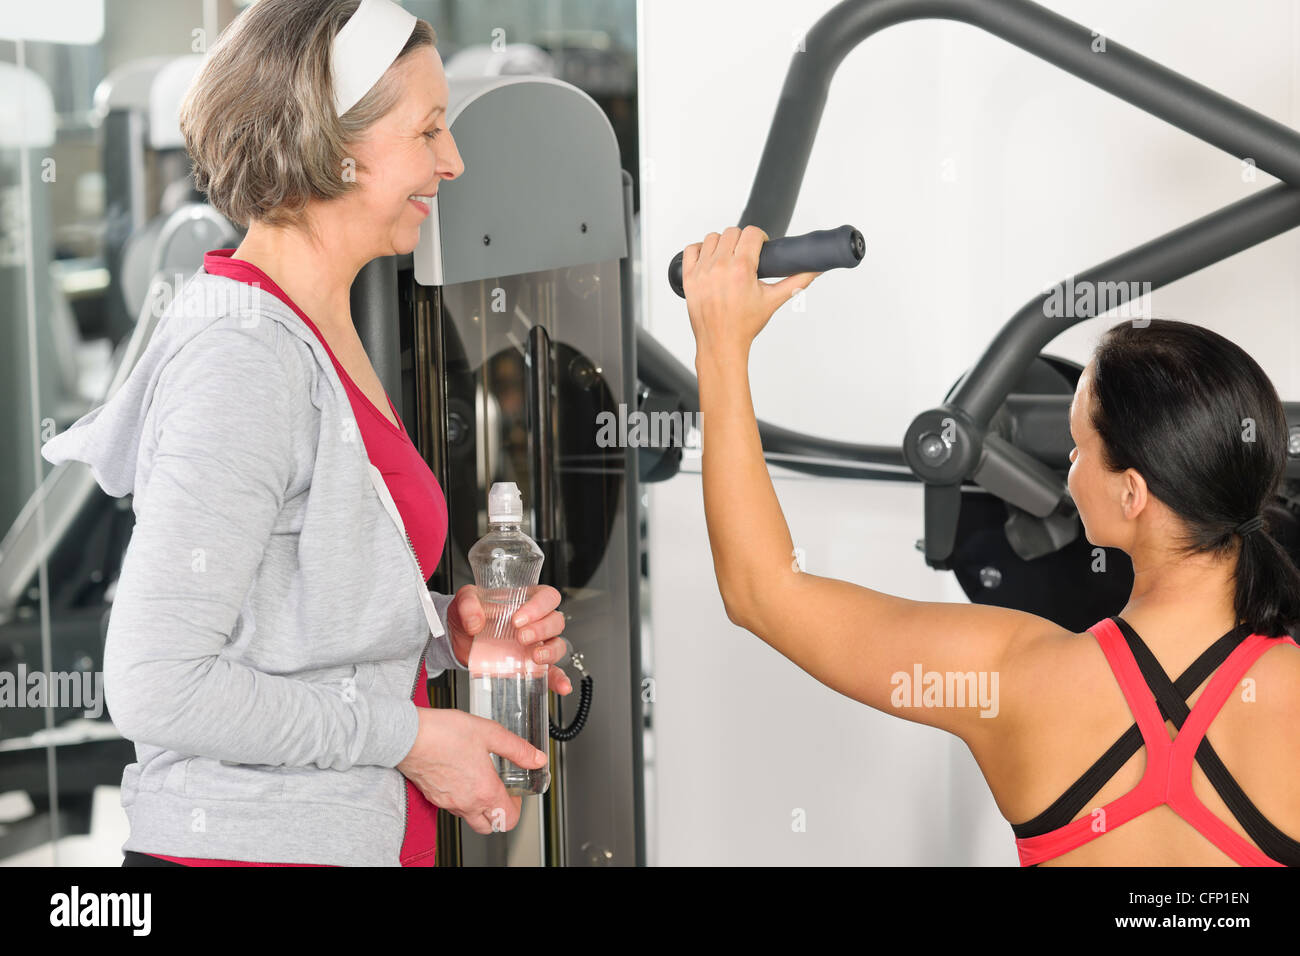 Personal trainer at fitness center showing exercise to senior woman Stock Photo